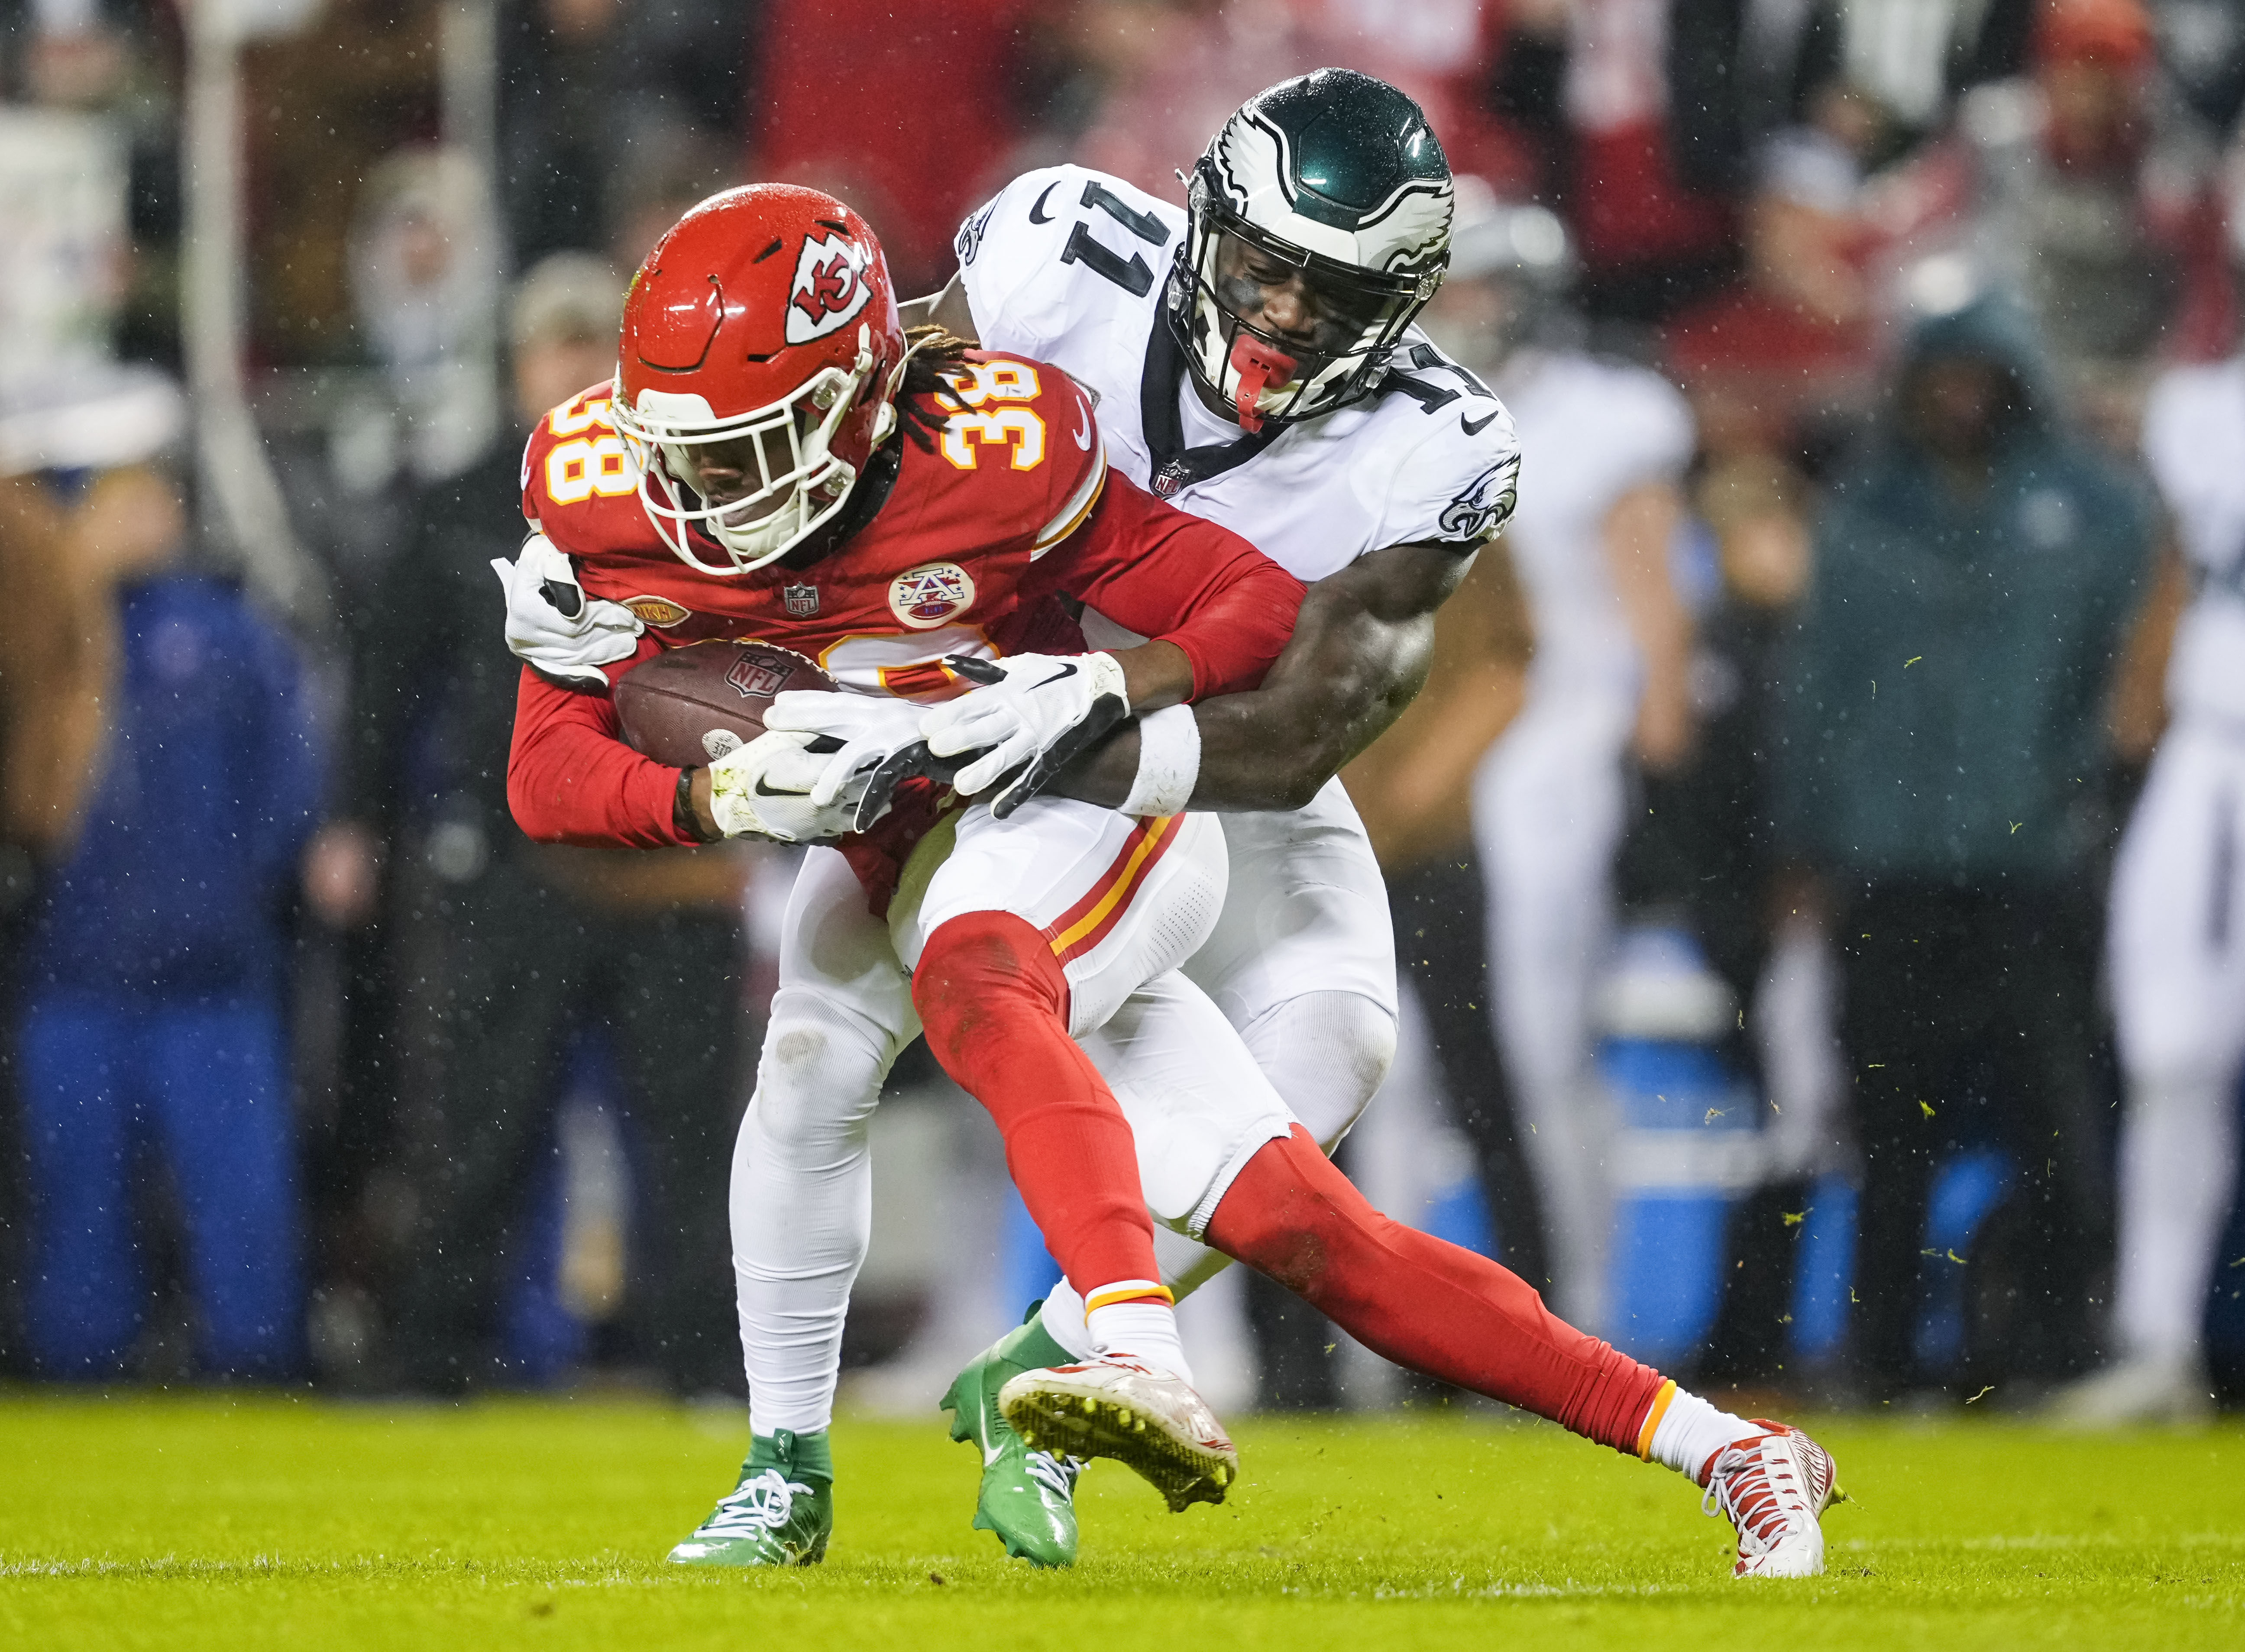 Nov 20, 2023; Kansas City, Missouri, USA; Kansas City Chiefs cornerback L'Jarius Sneed (38) is tackled after intercepting a pass intended for Philadelphia Eagles wide receiver A.J. Brown (11) during the first half at GEHA Field at Arrowhead Stadium. Mandatory Credit: Jay Biggerstaff-USA TODAY Sports